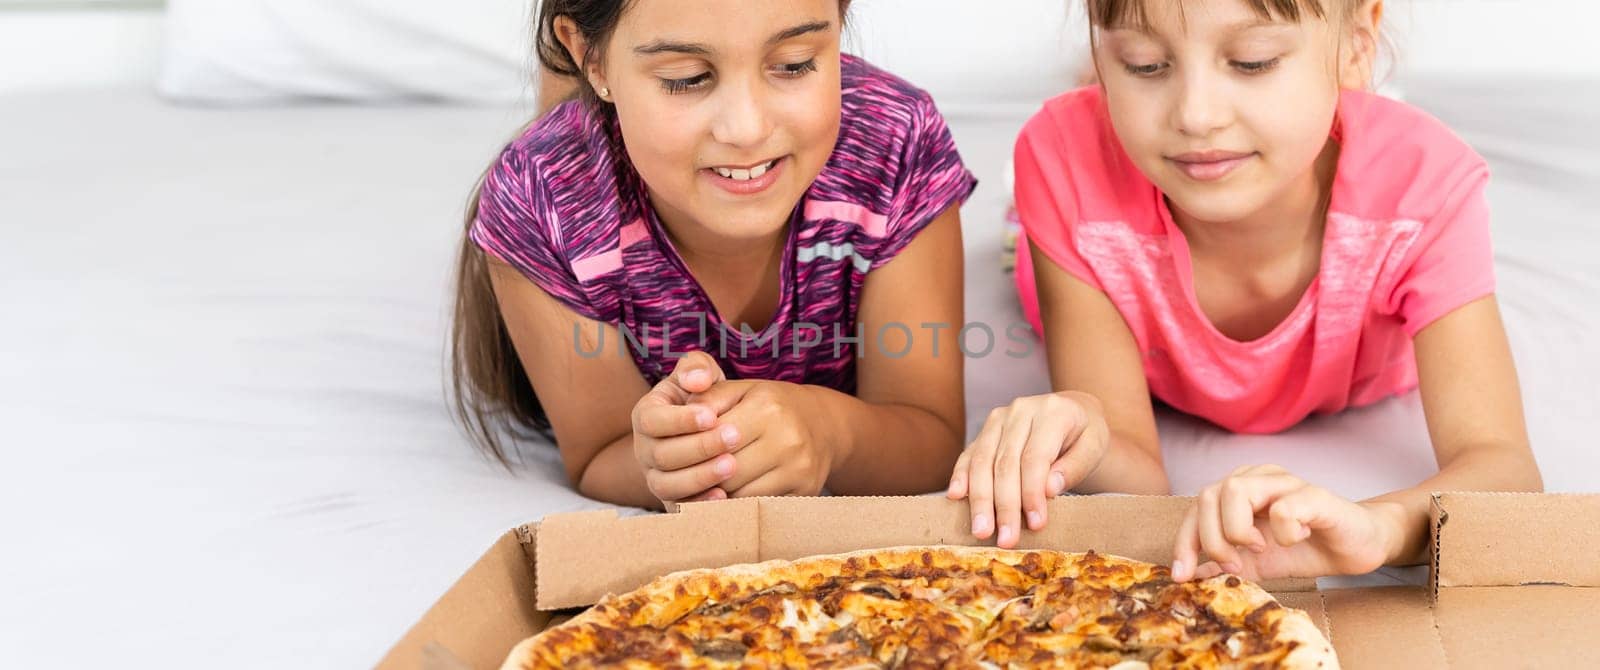 Two little girls eating pizza at home by Andelov13